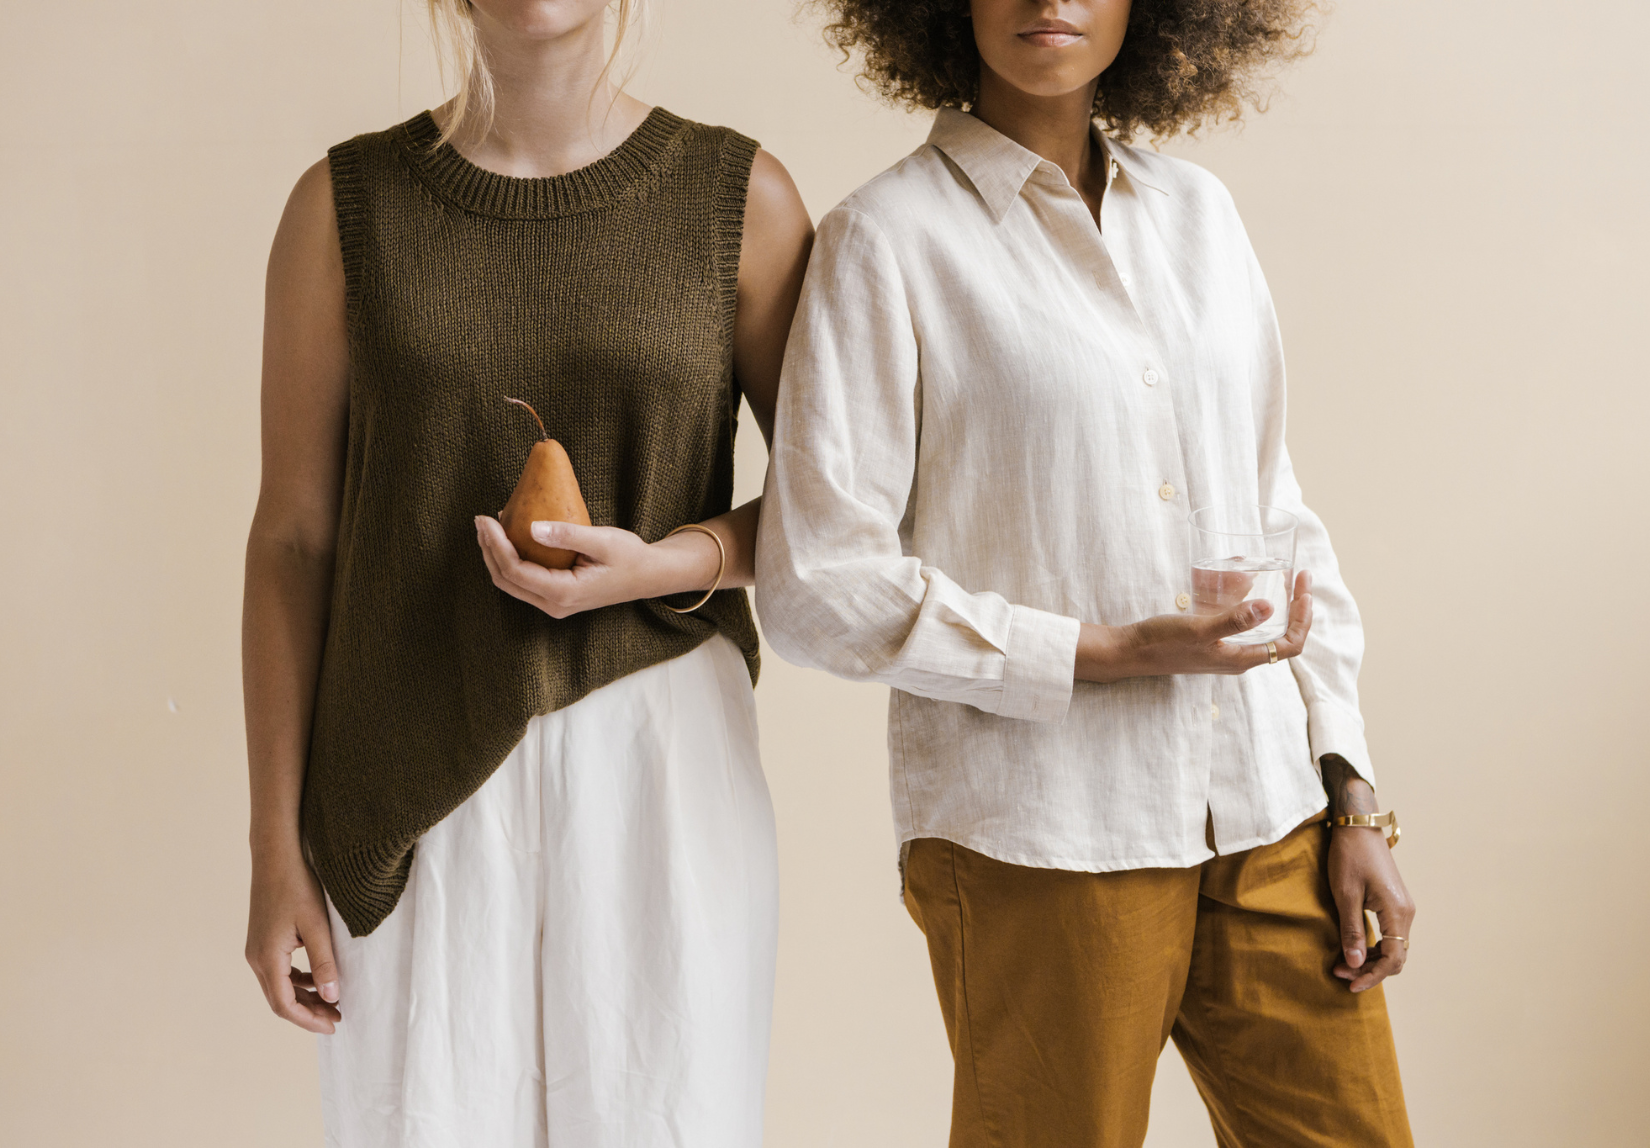 Two women standing side by side, one holding a pear and one holding a glass of water.